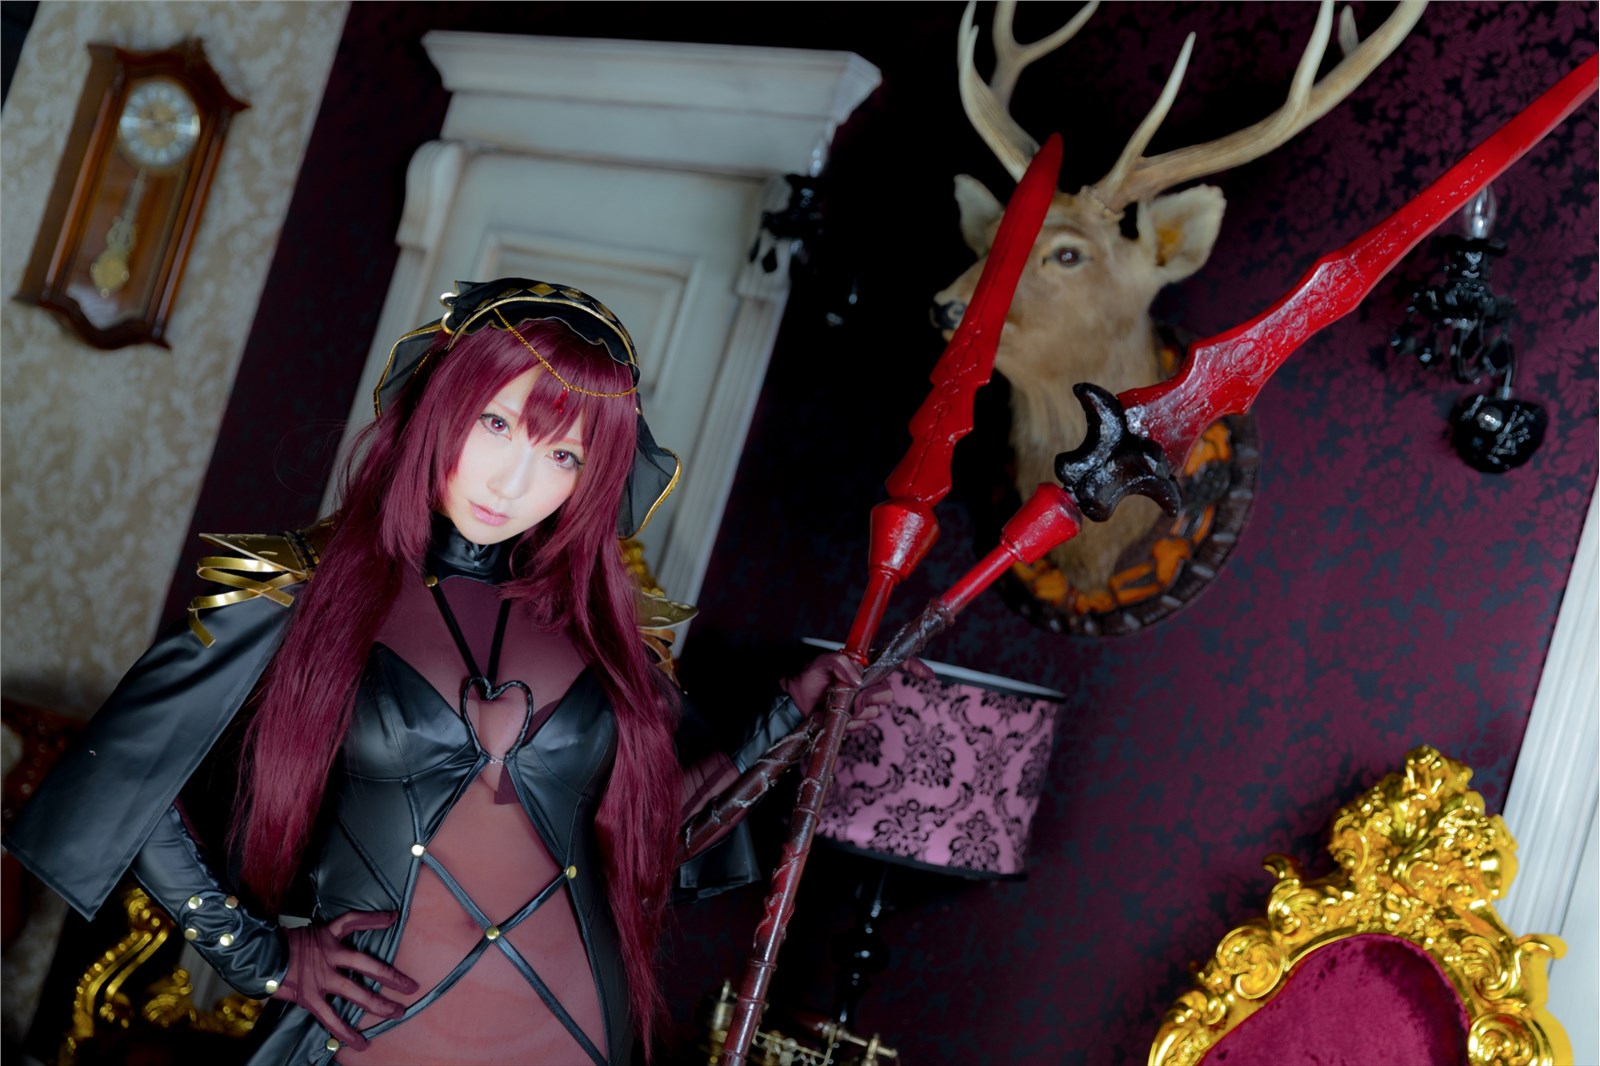 cos (Cosplay)(C92) Shooting Star (サク) Shadow Queen 598MB1(69)